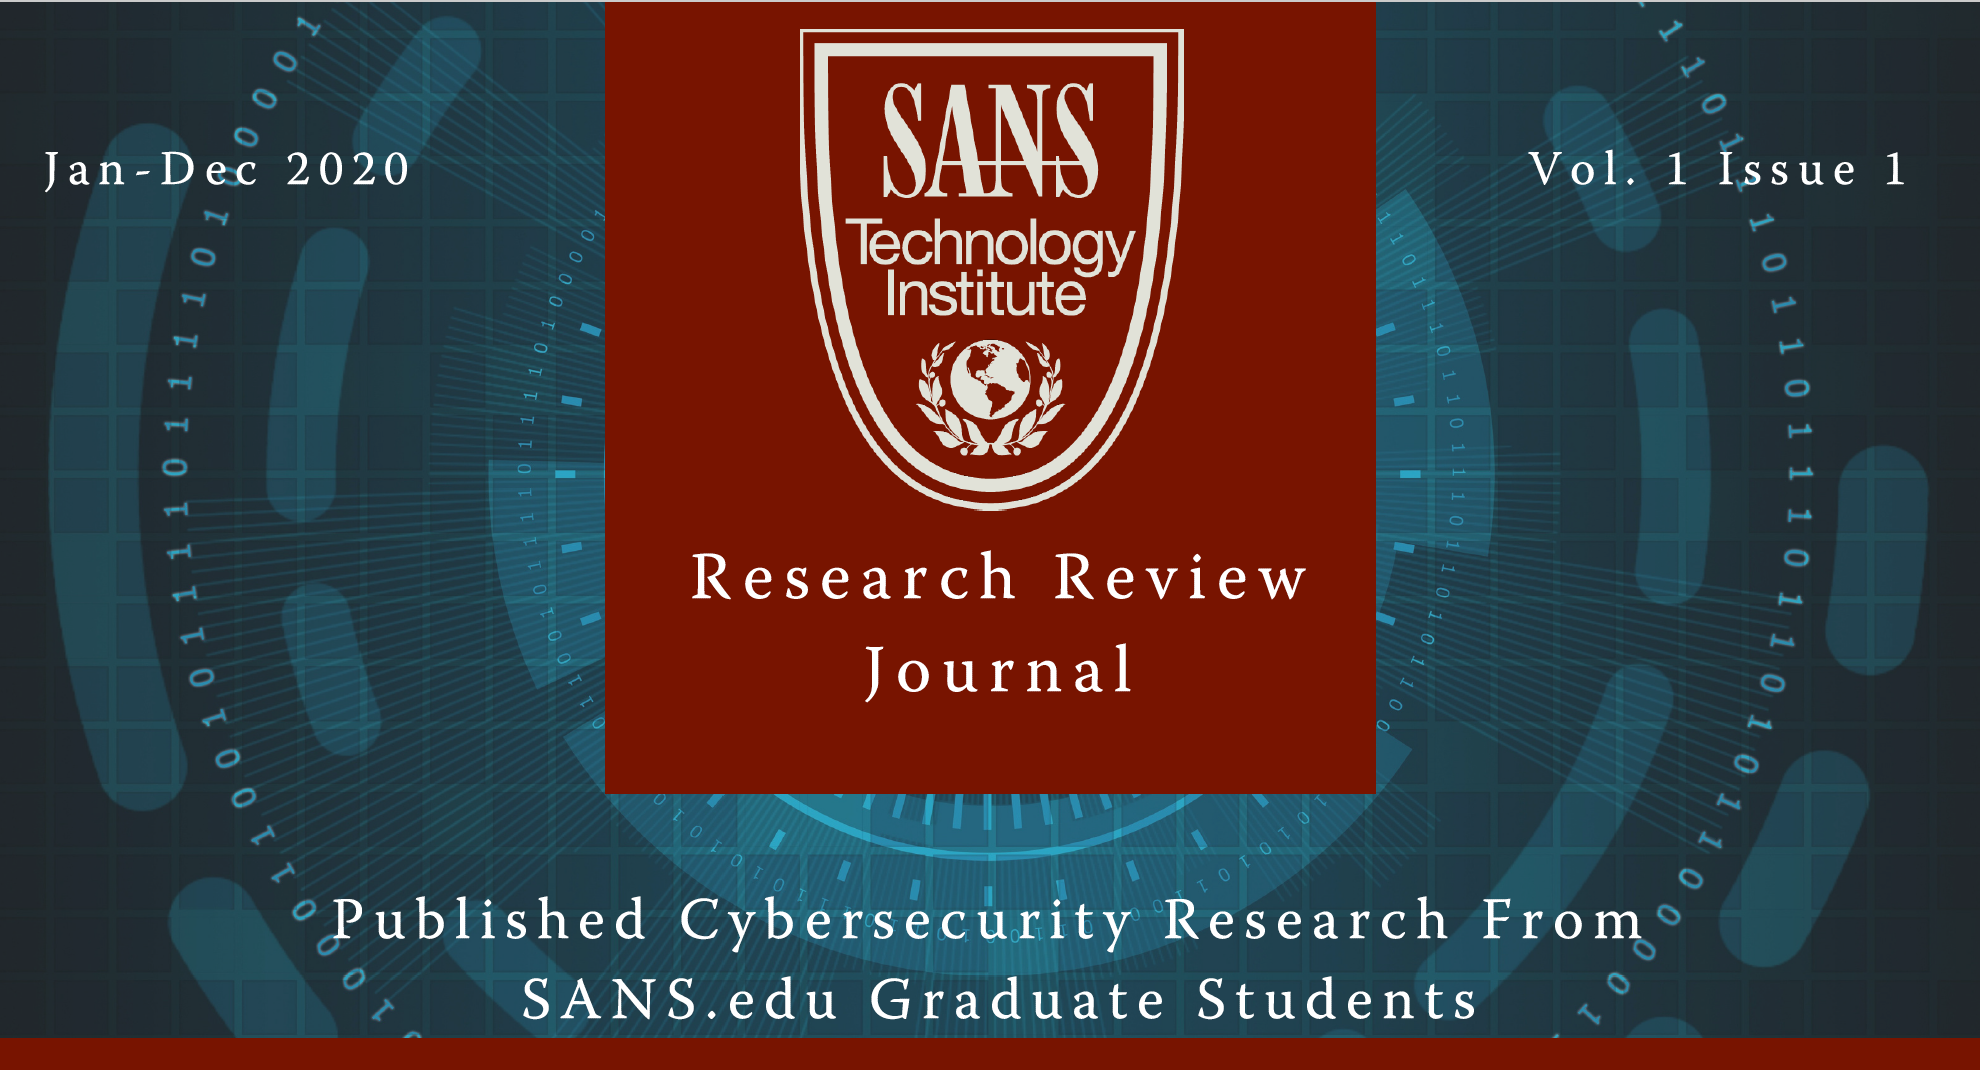 Cyber Security Research | SANS Technology Institute